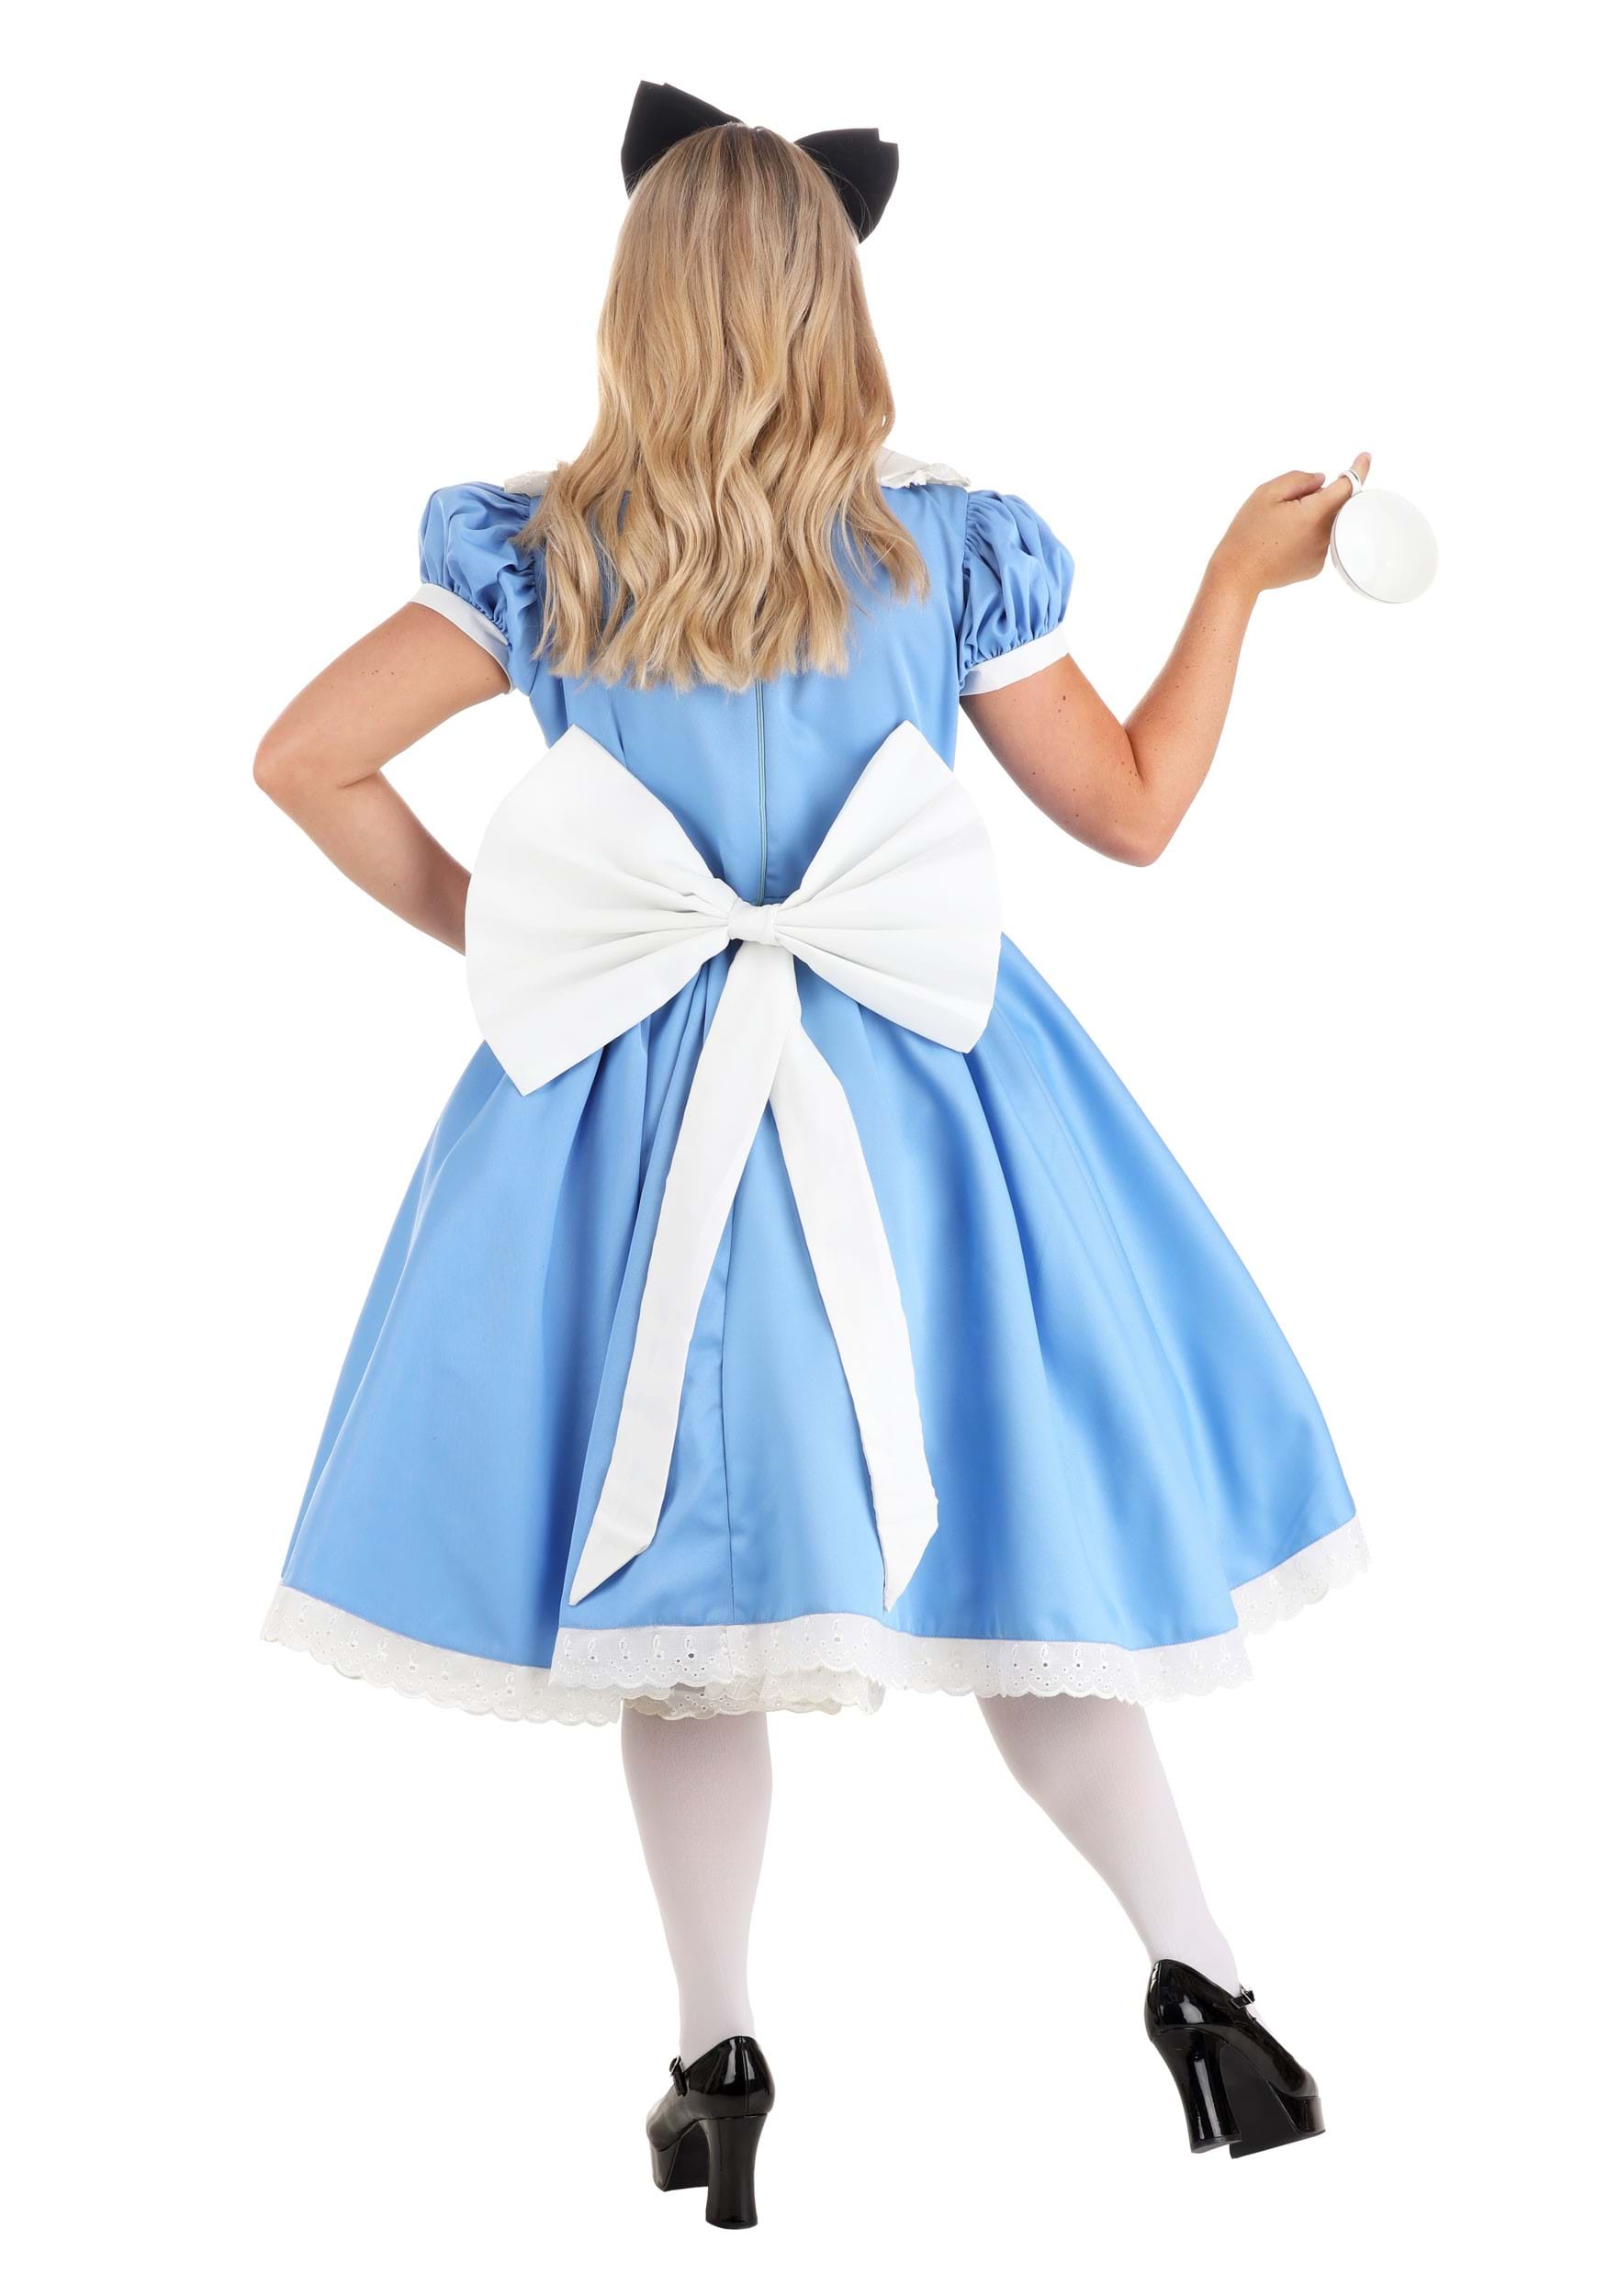 Womens Plus Size Storybook Alice In Wonderland Costume- Complete